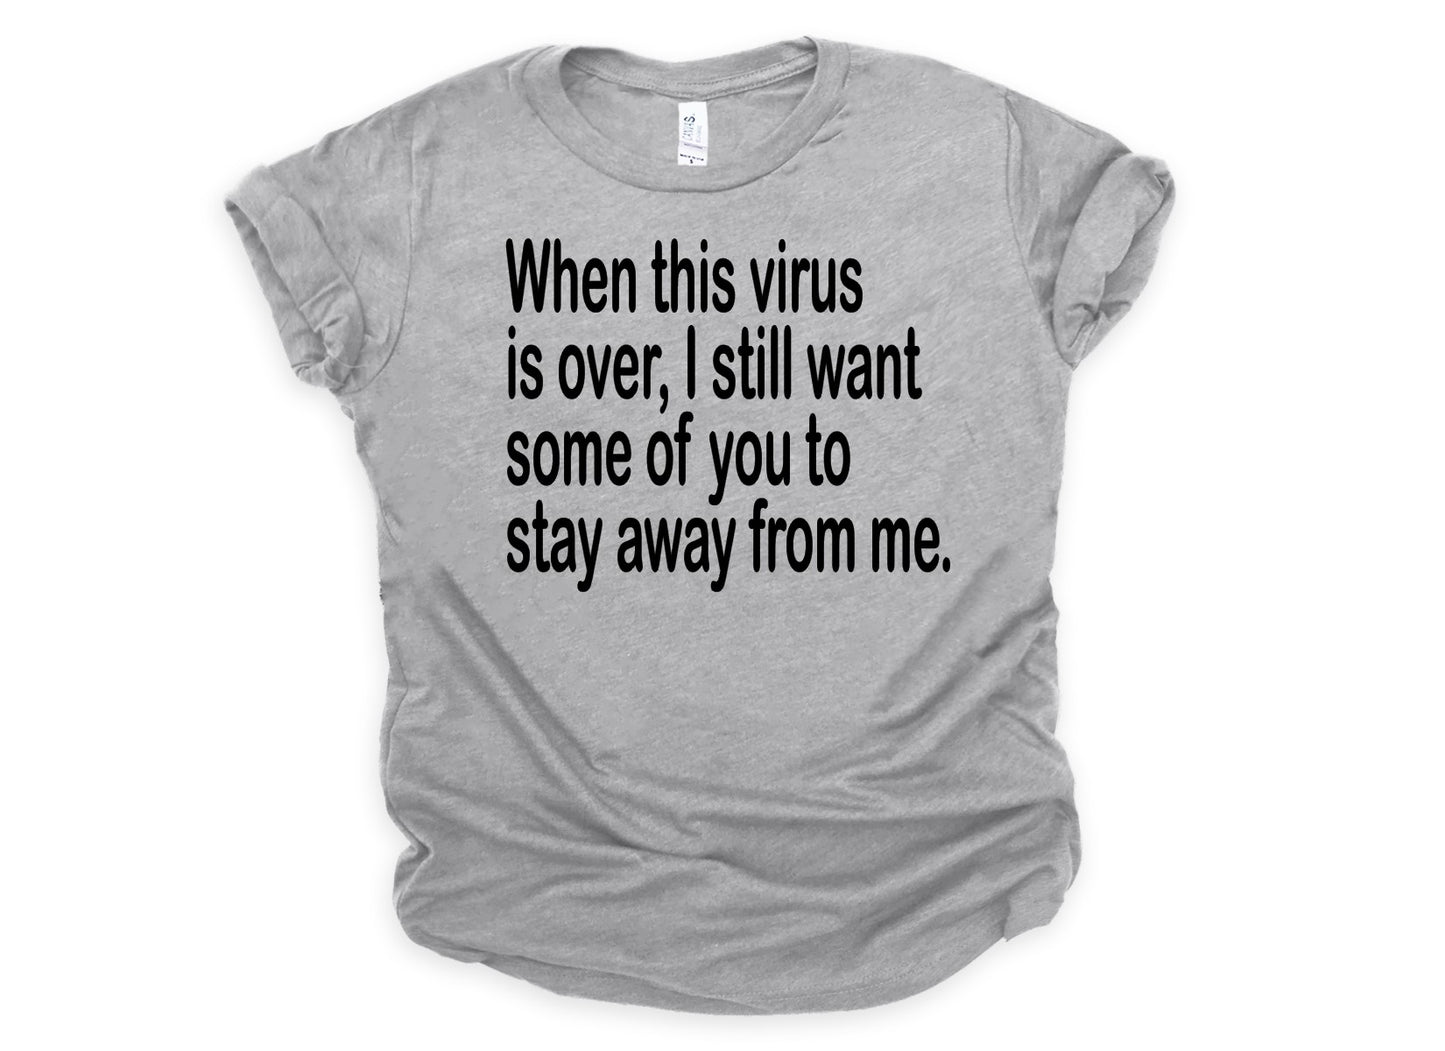 When this virus is over, I still want some of you to stay away from me